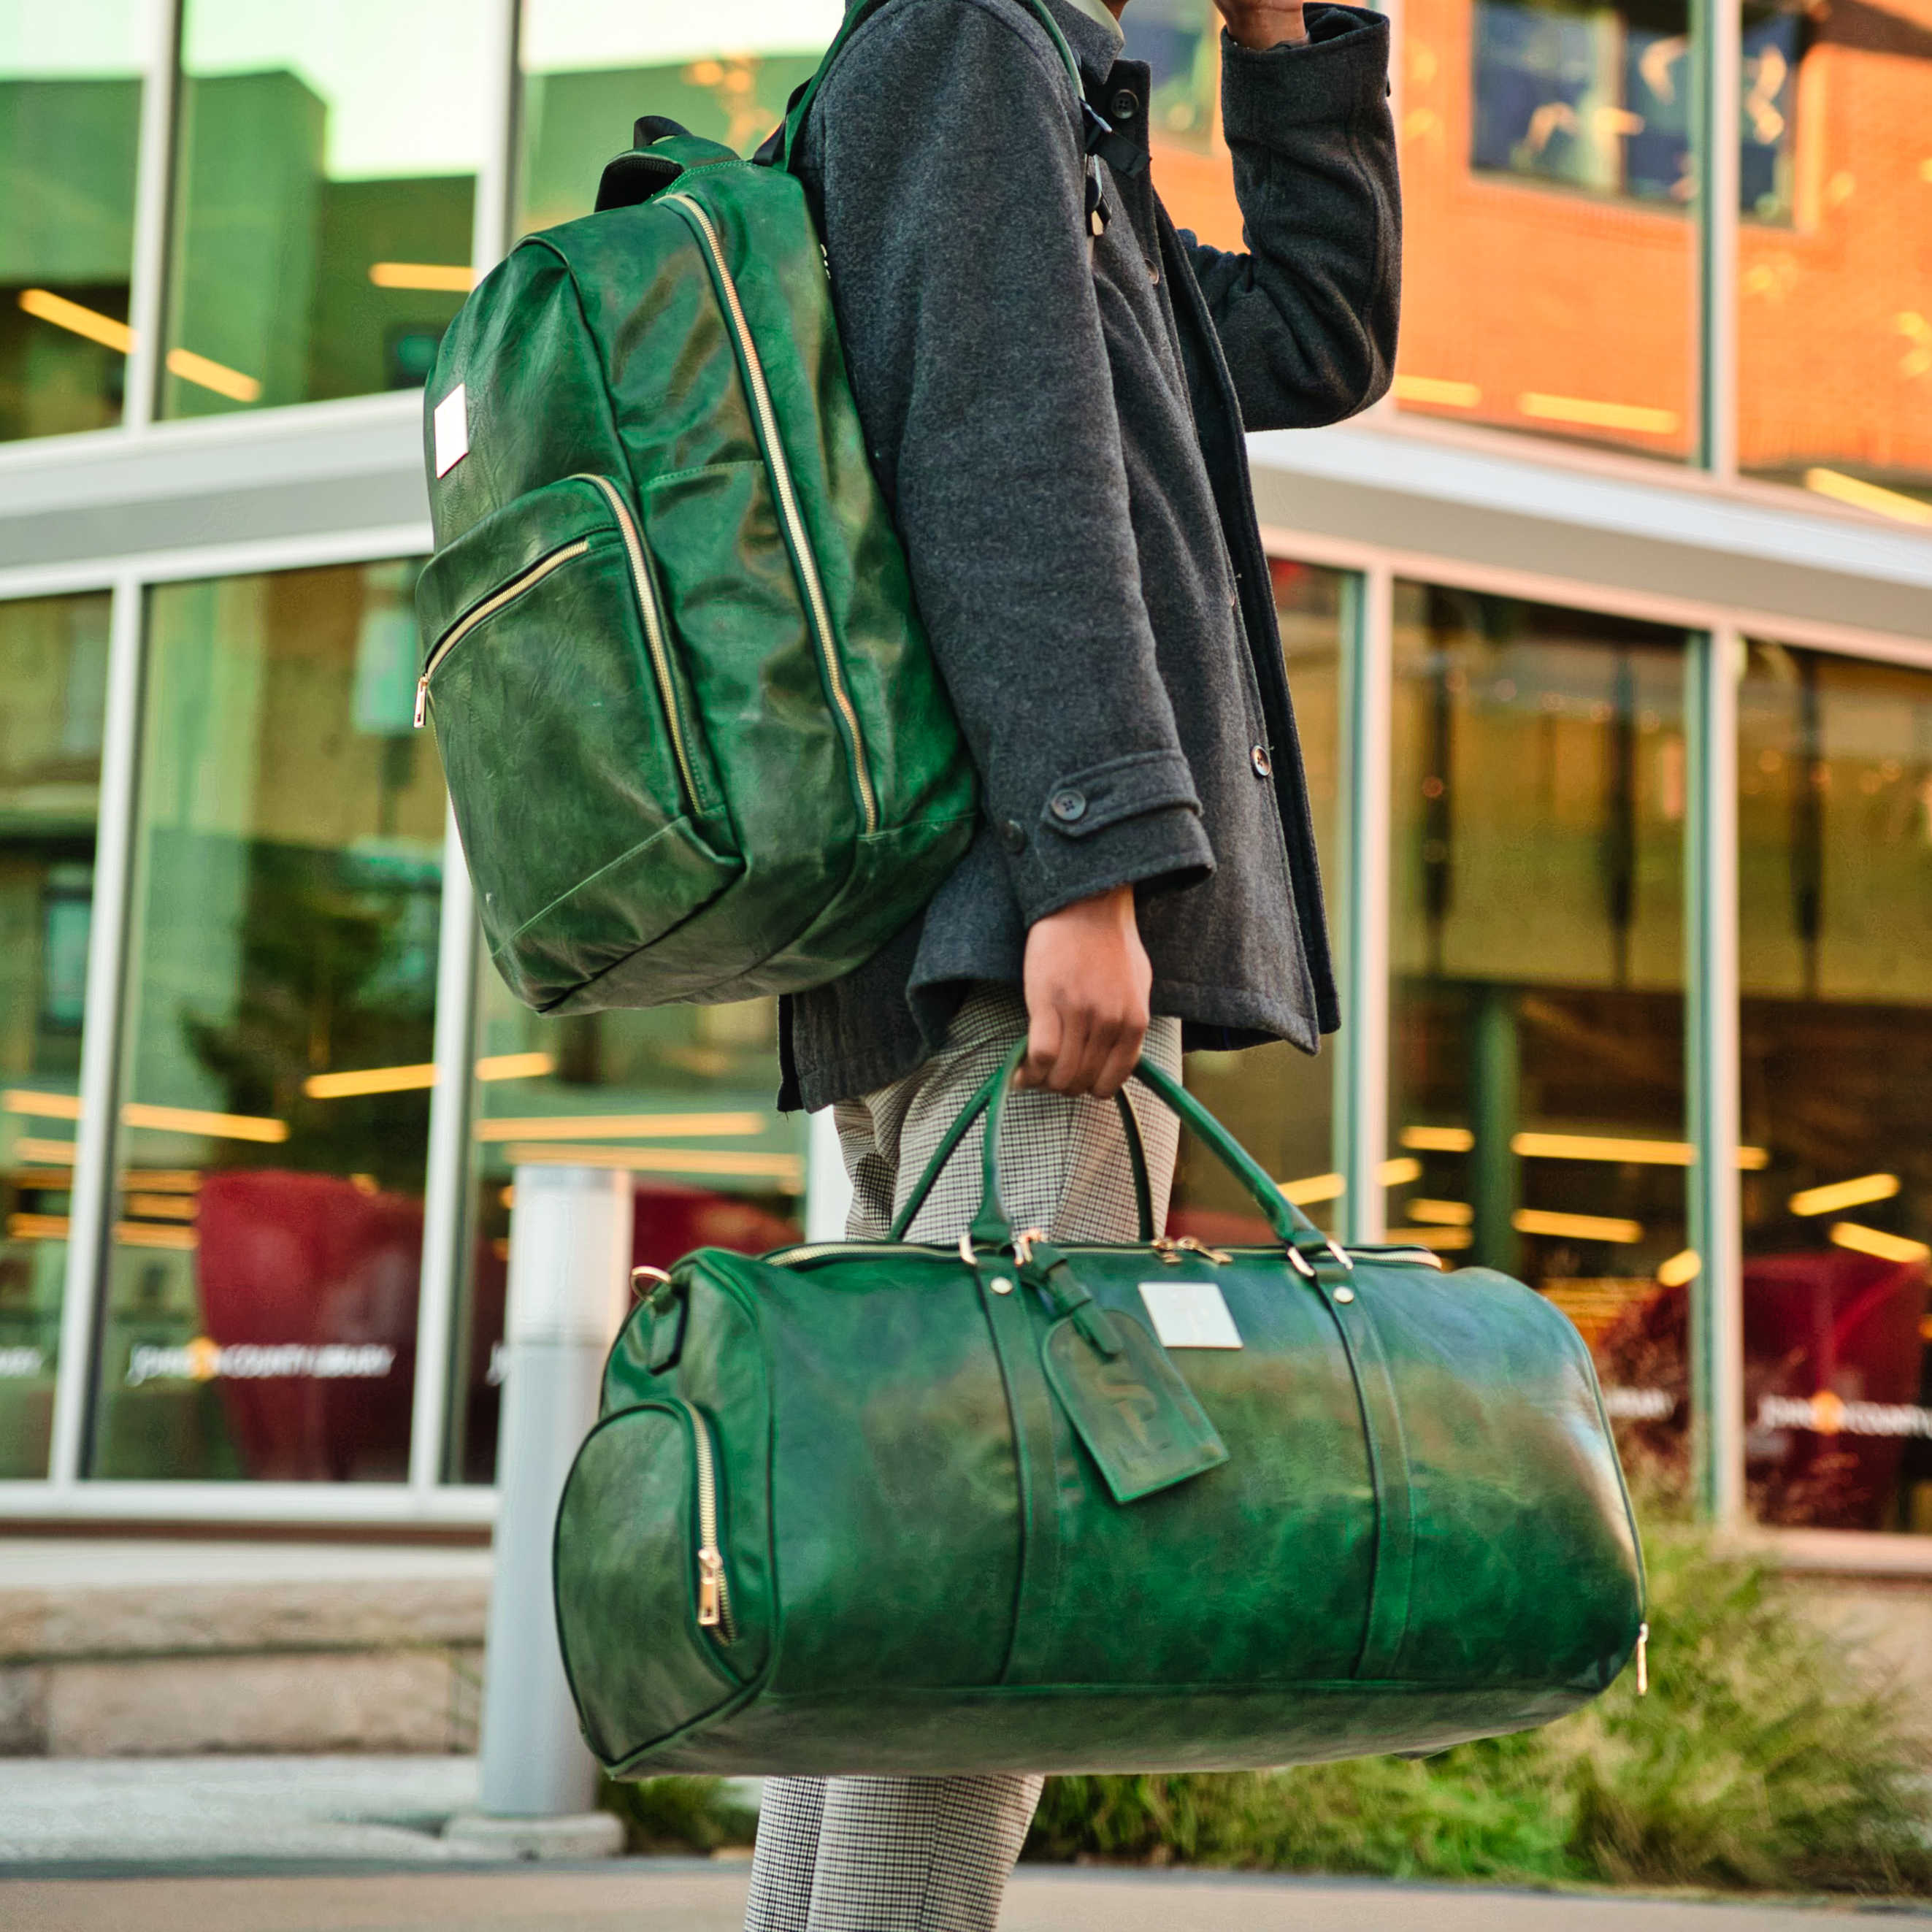 Emerald Green Luciano Leather Duffle Bag (New Weekender Design) - Sole Premise